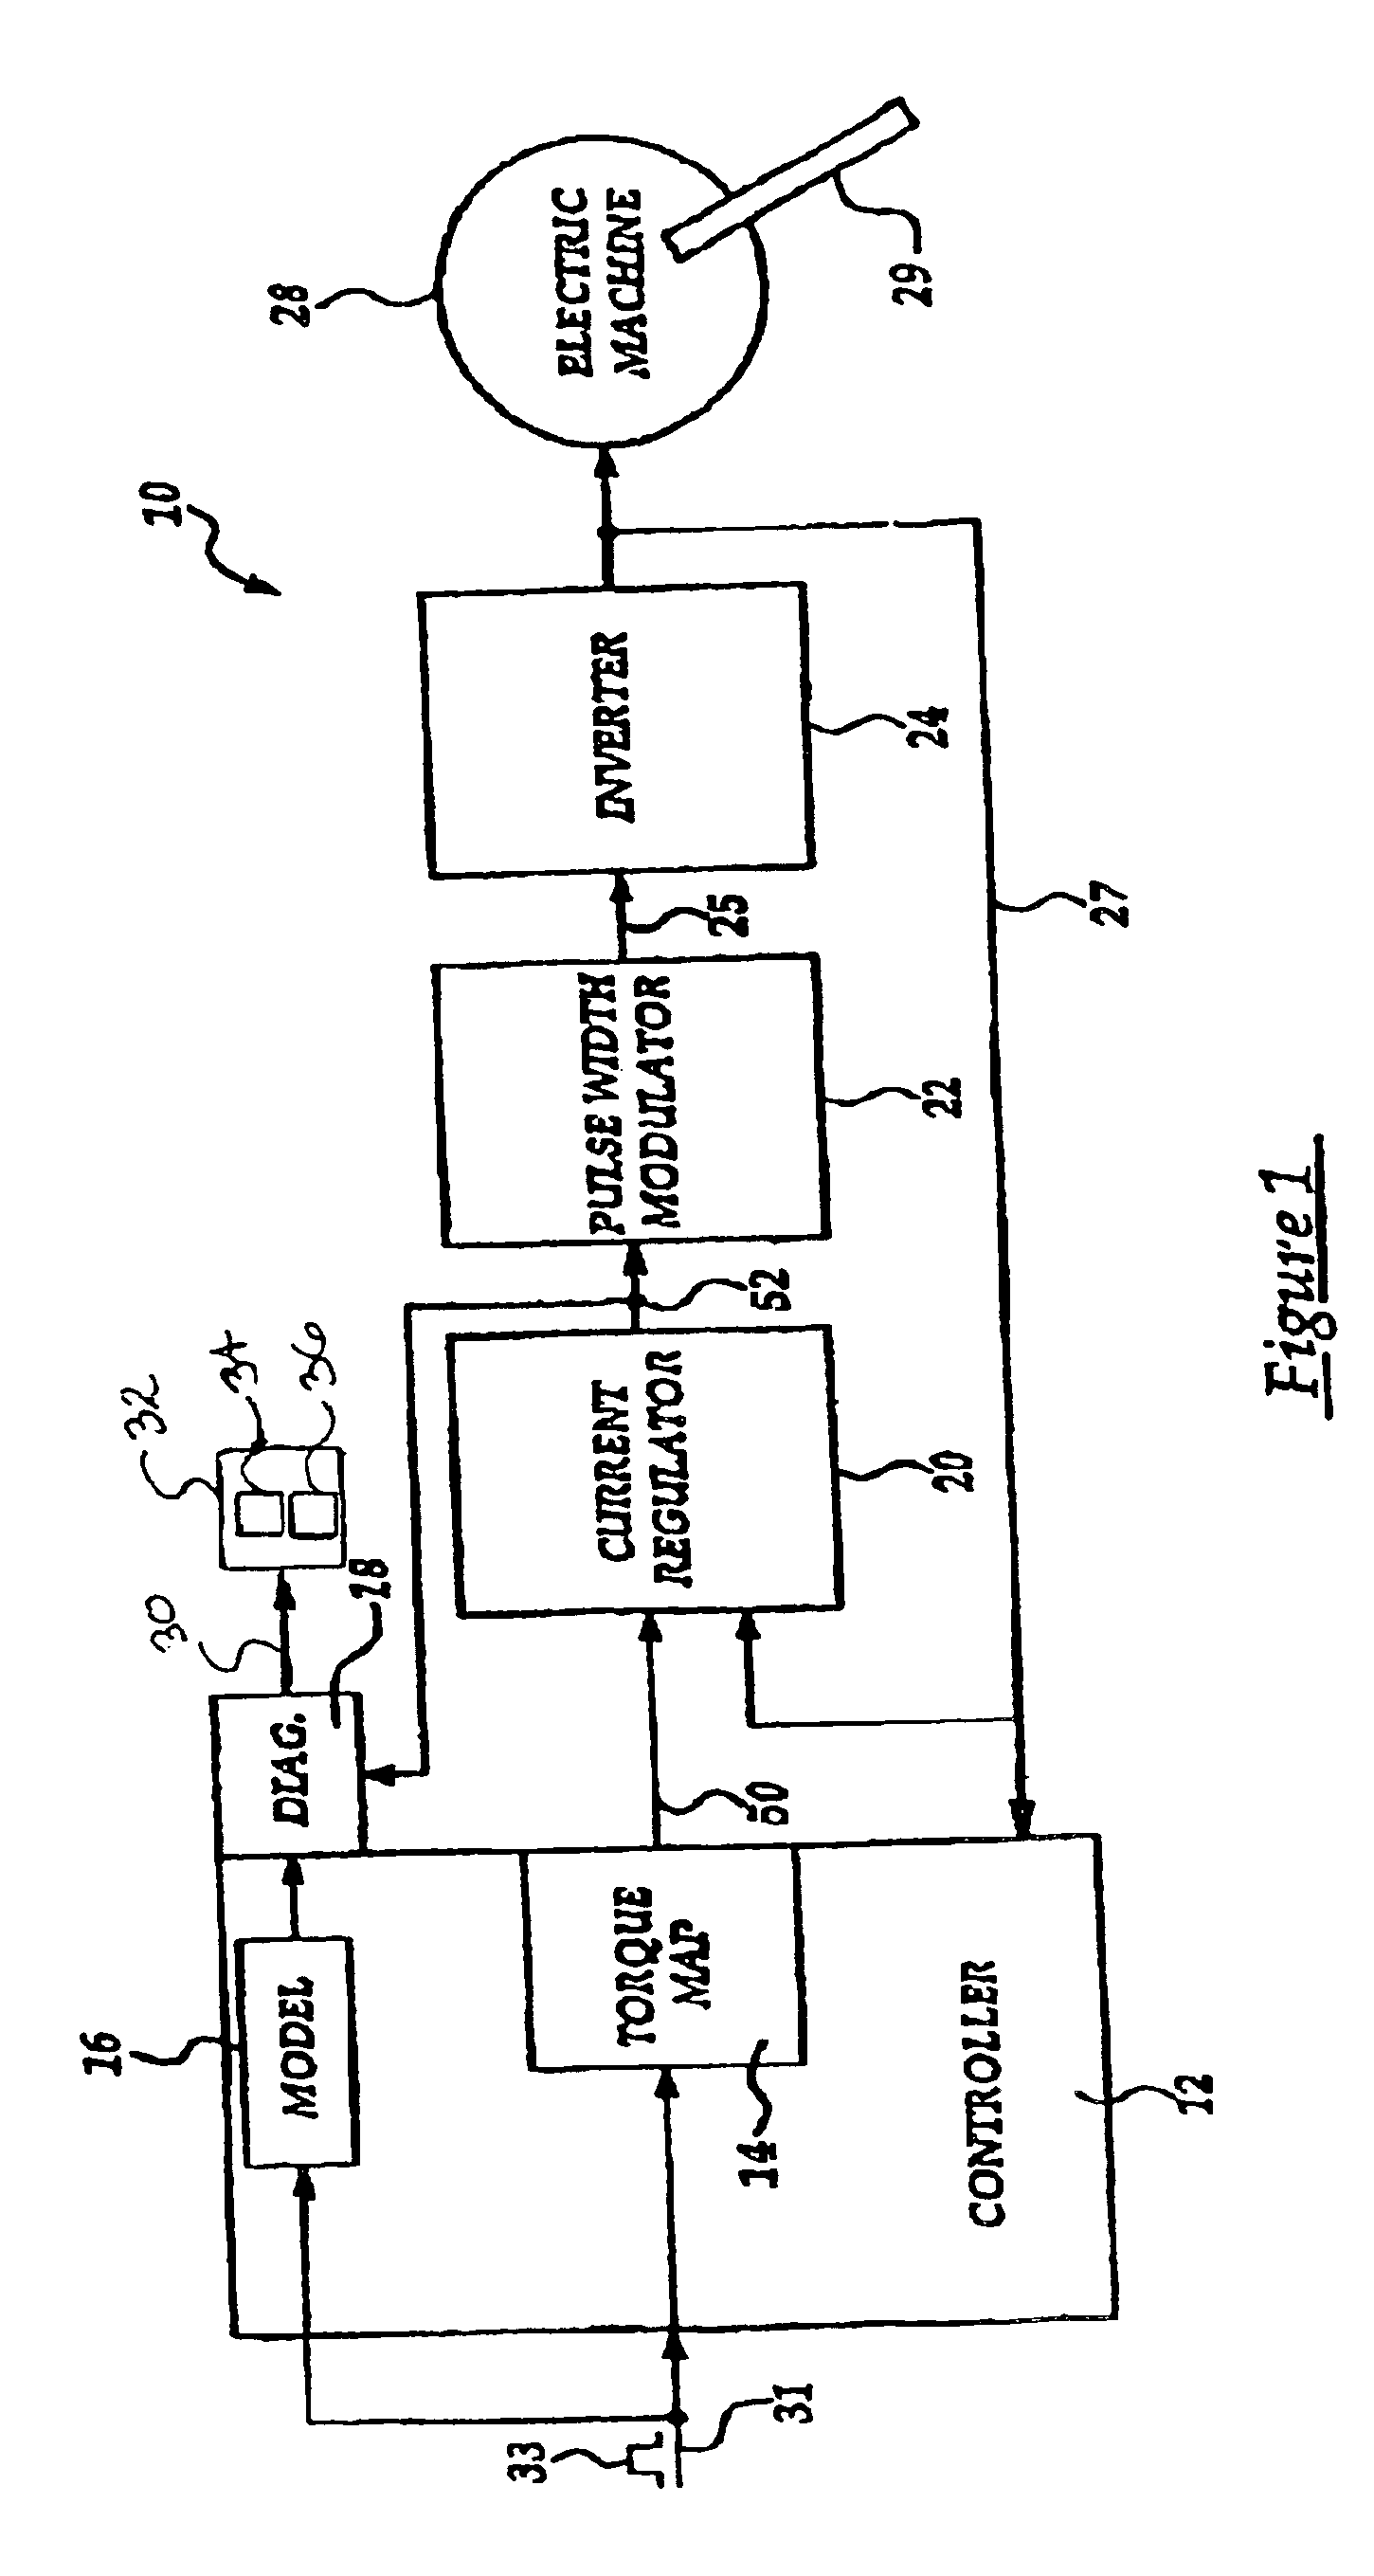 Diagnostic method for an electric drive assembly